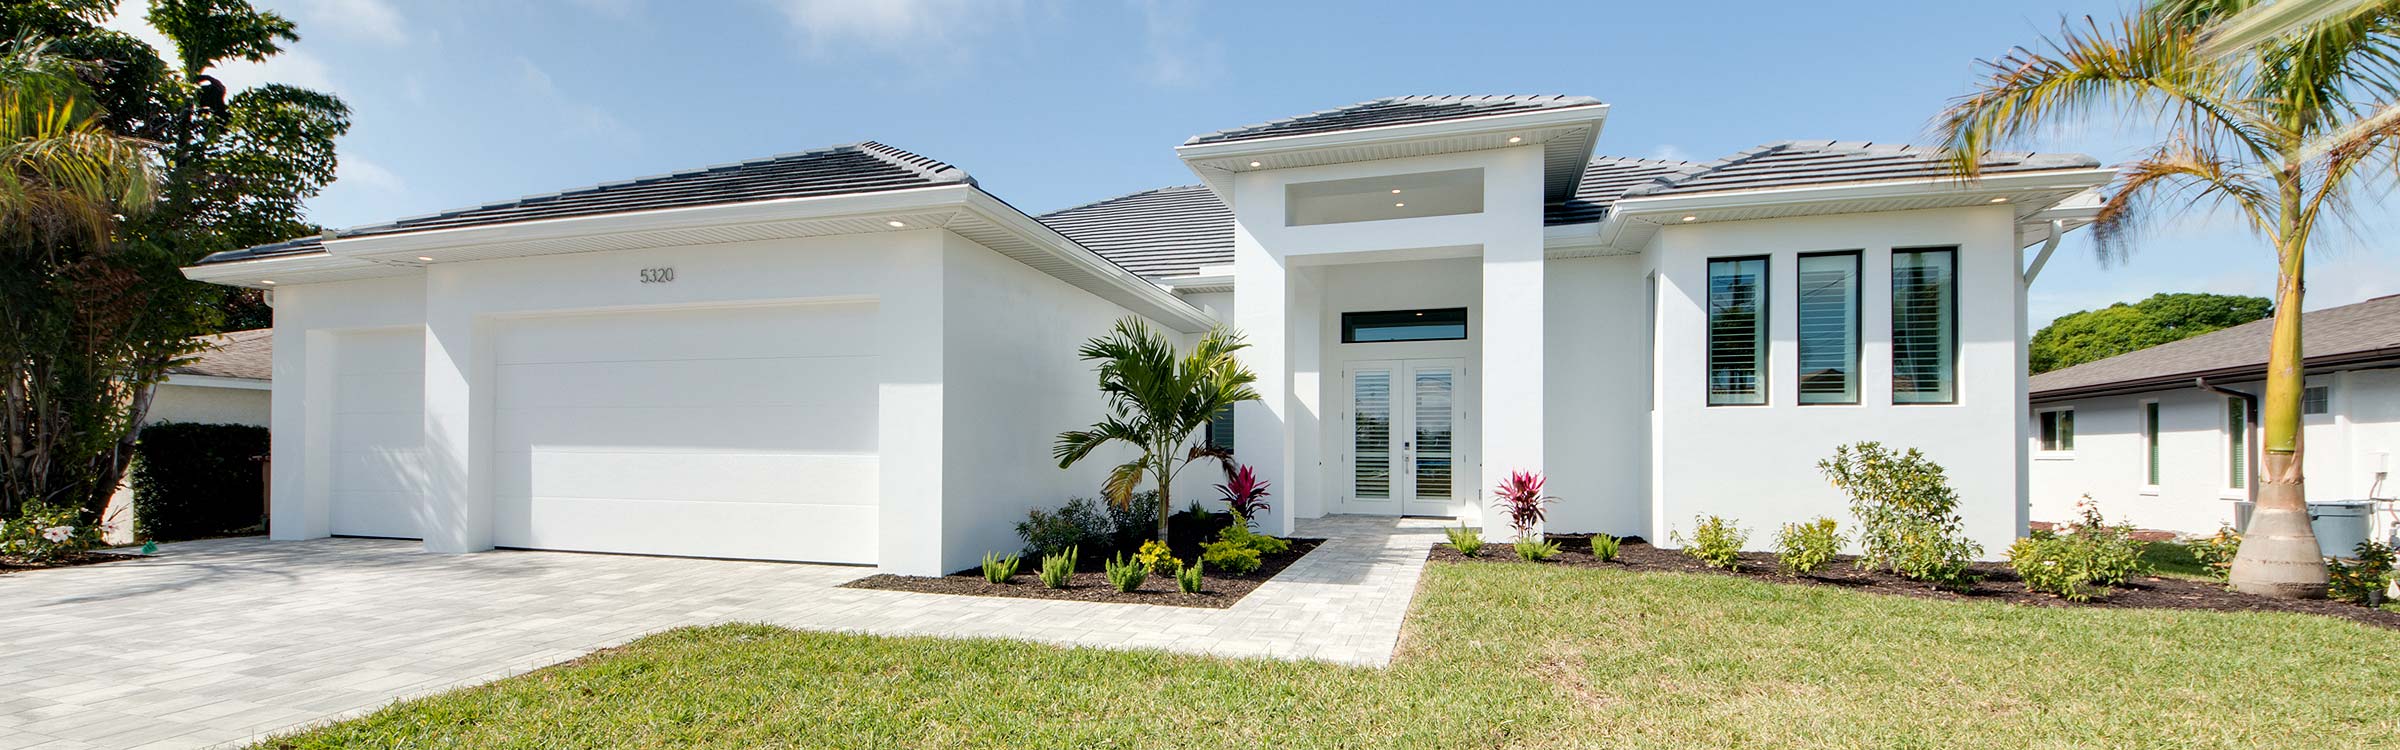 Immobilien Fort Myers